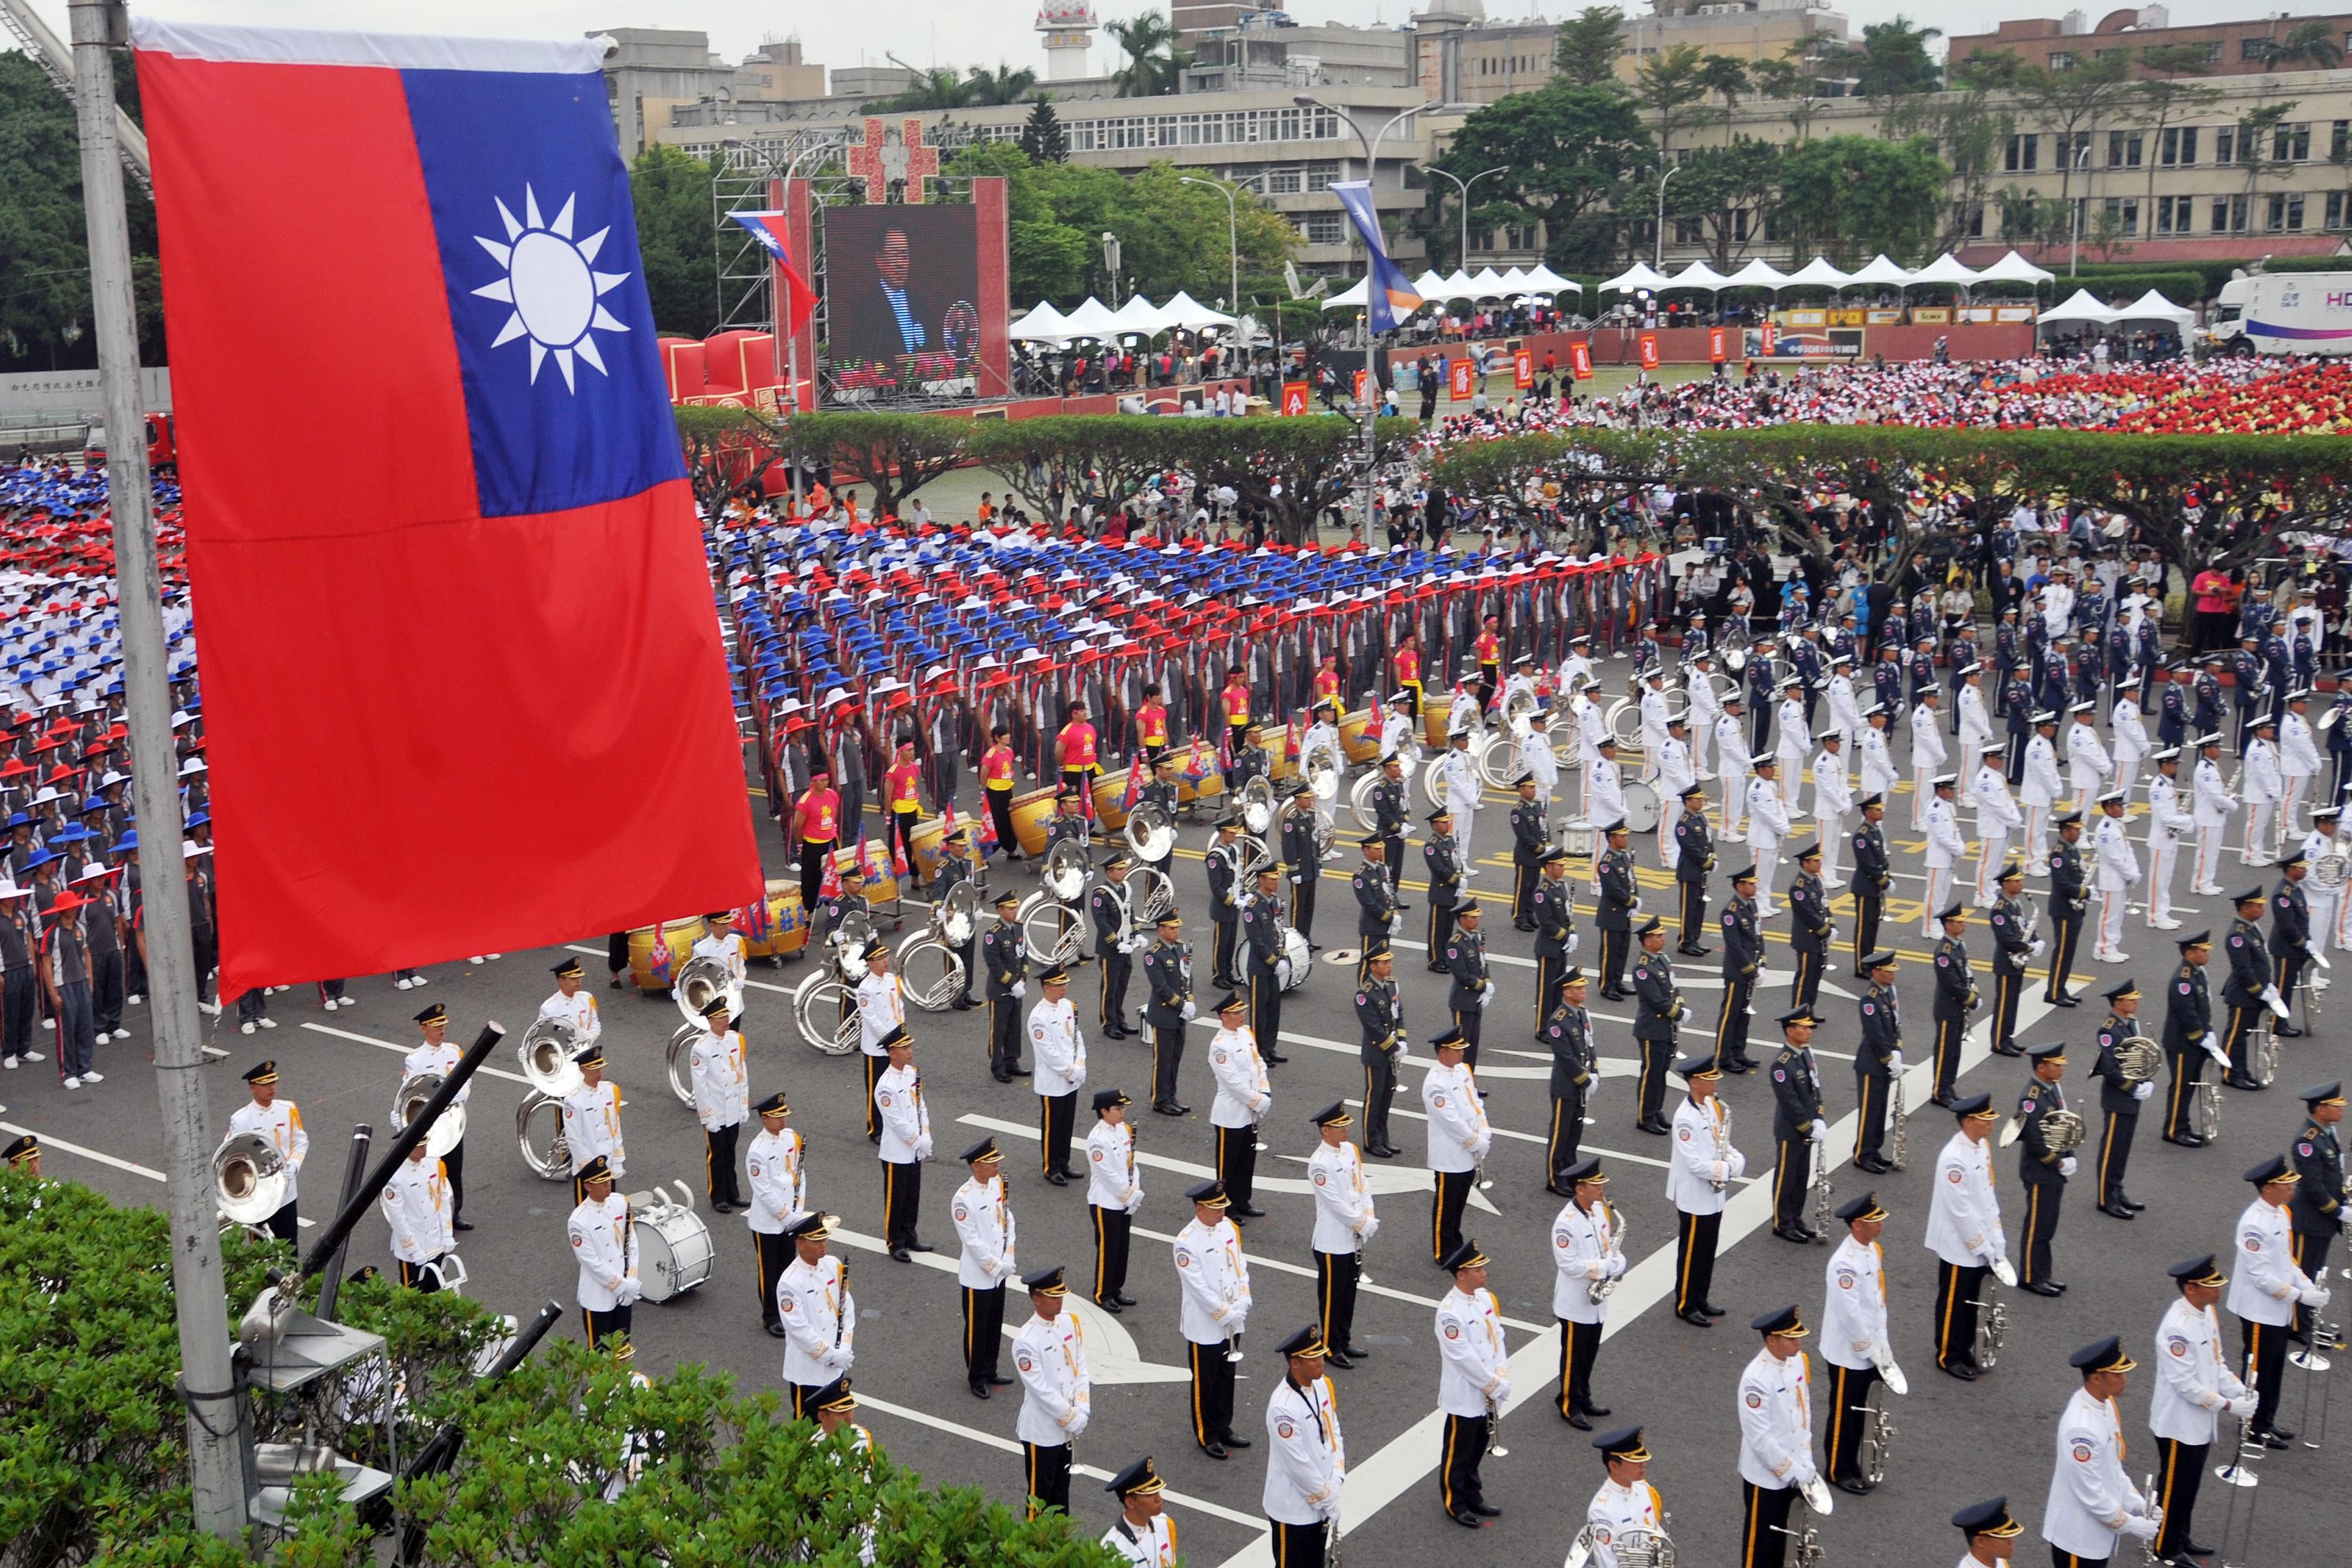 Members of a Taiwanese military band and people wearing hats in the colors of Taiwan’s national flag.